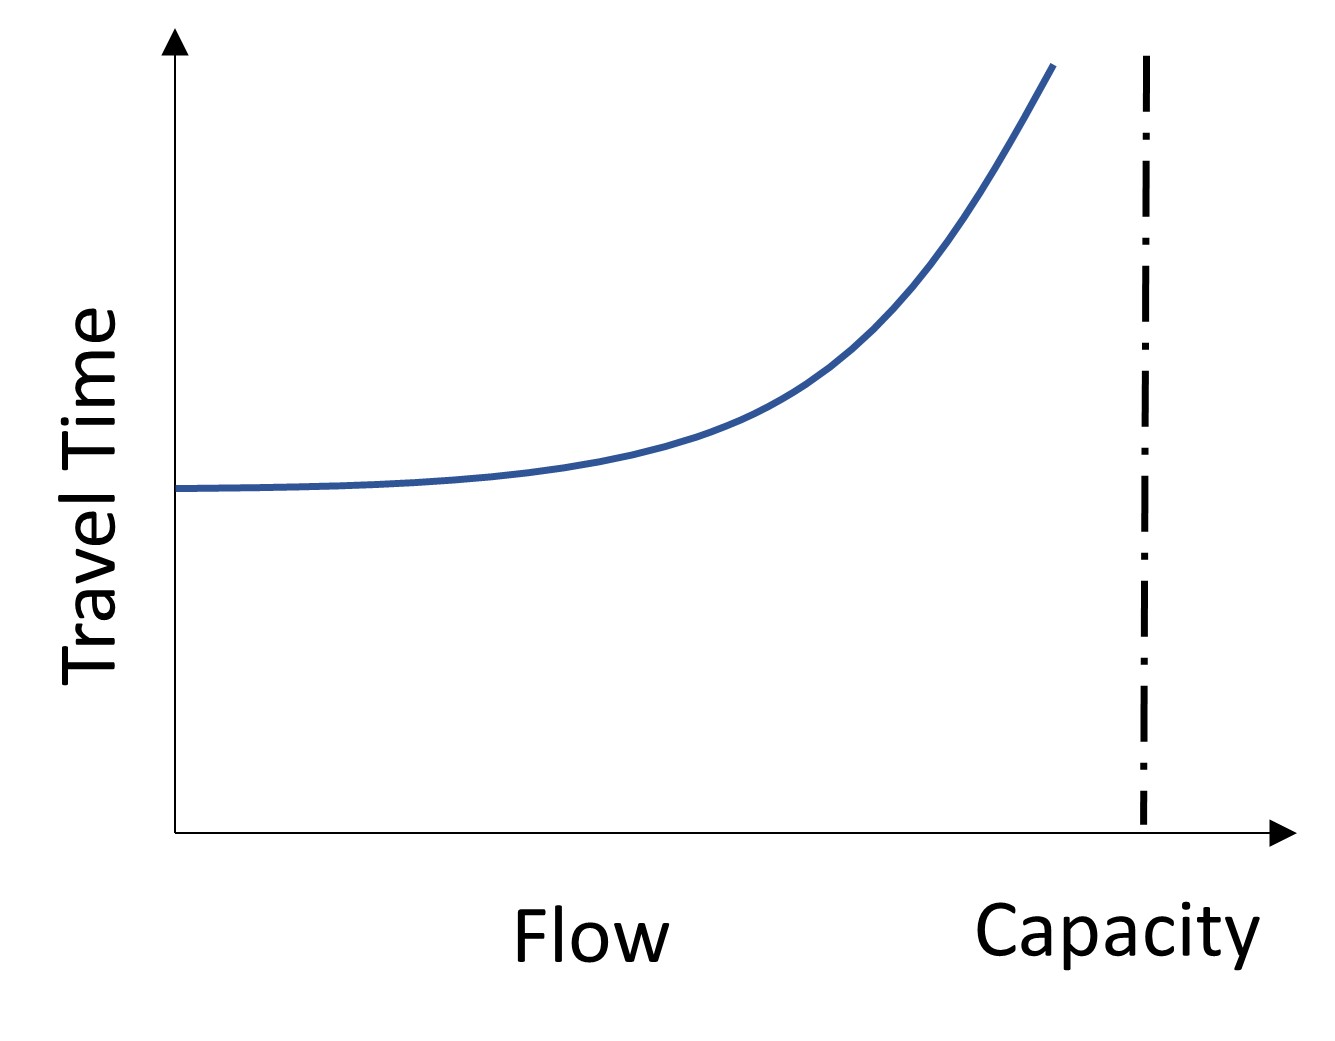 This figure shows the exponential relationship between travel time and flow of traffic with capacity line.